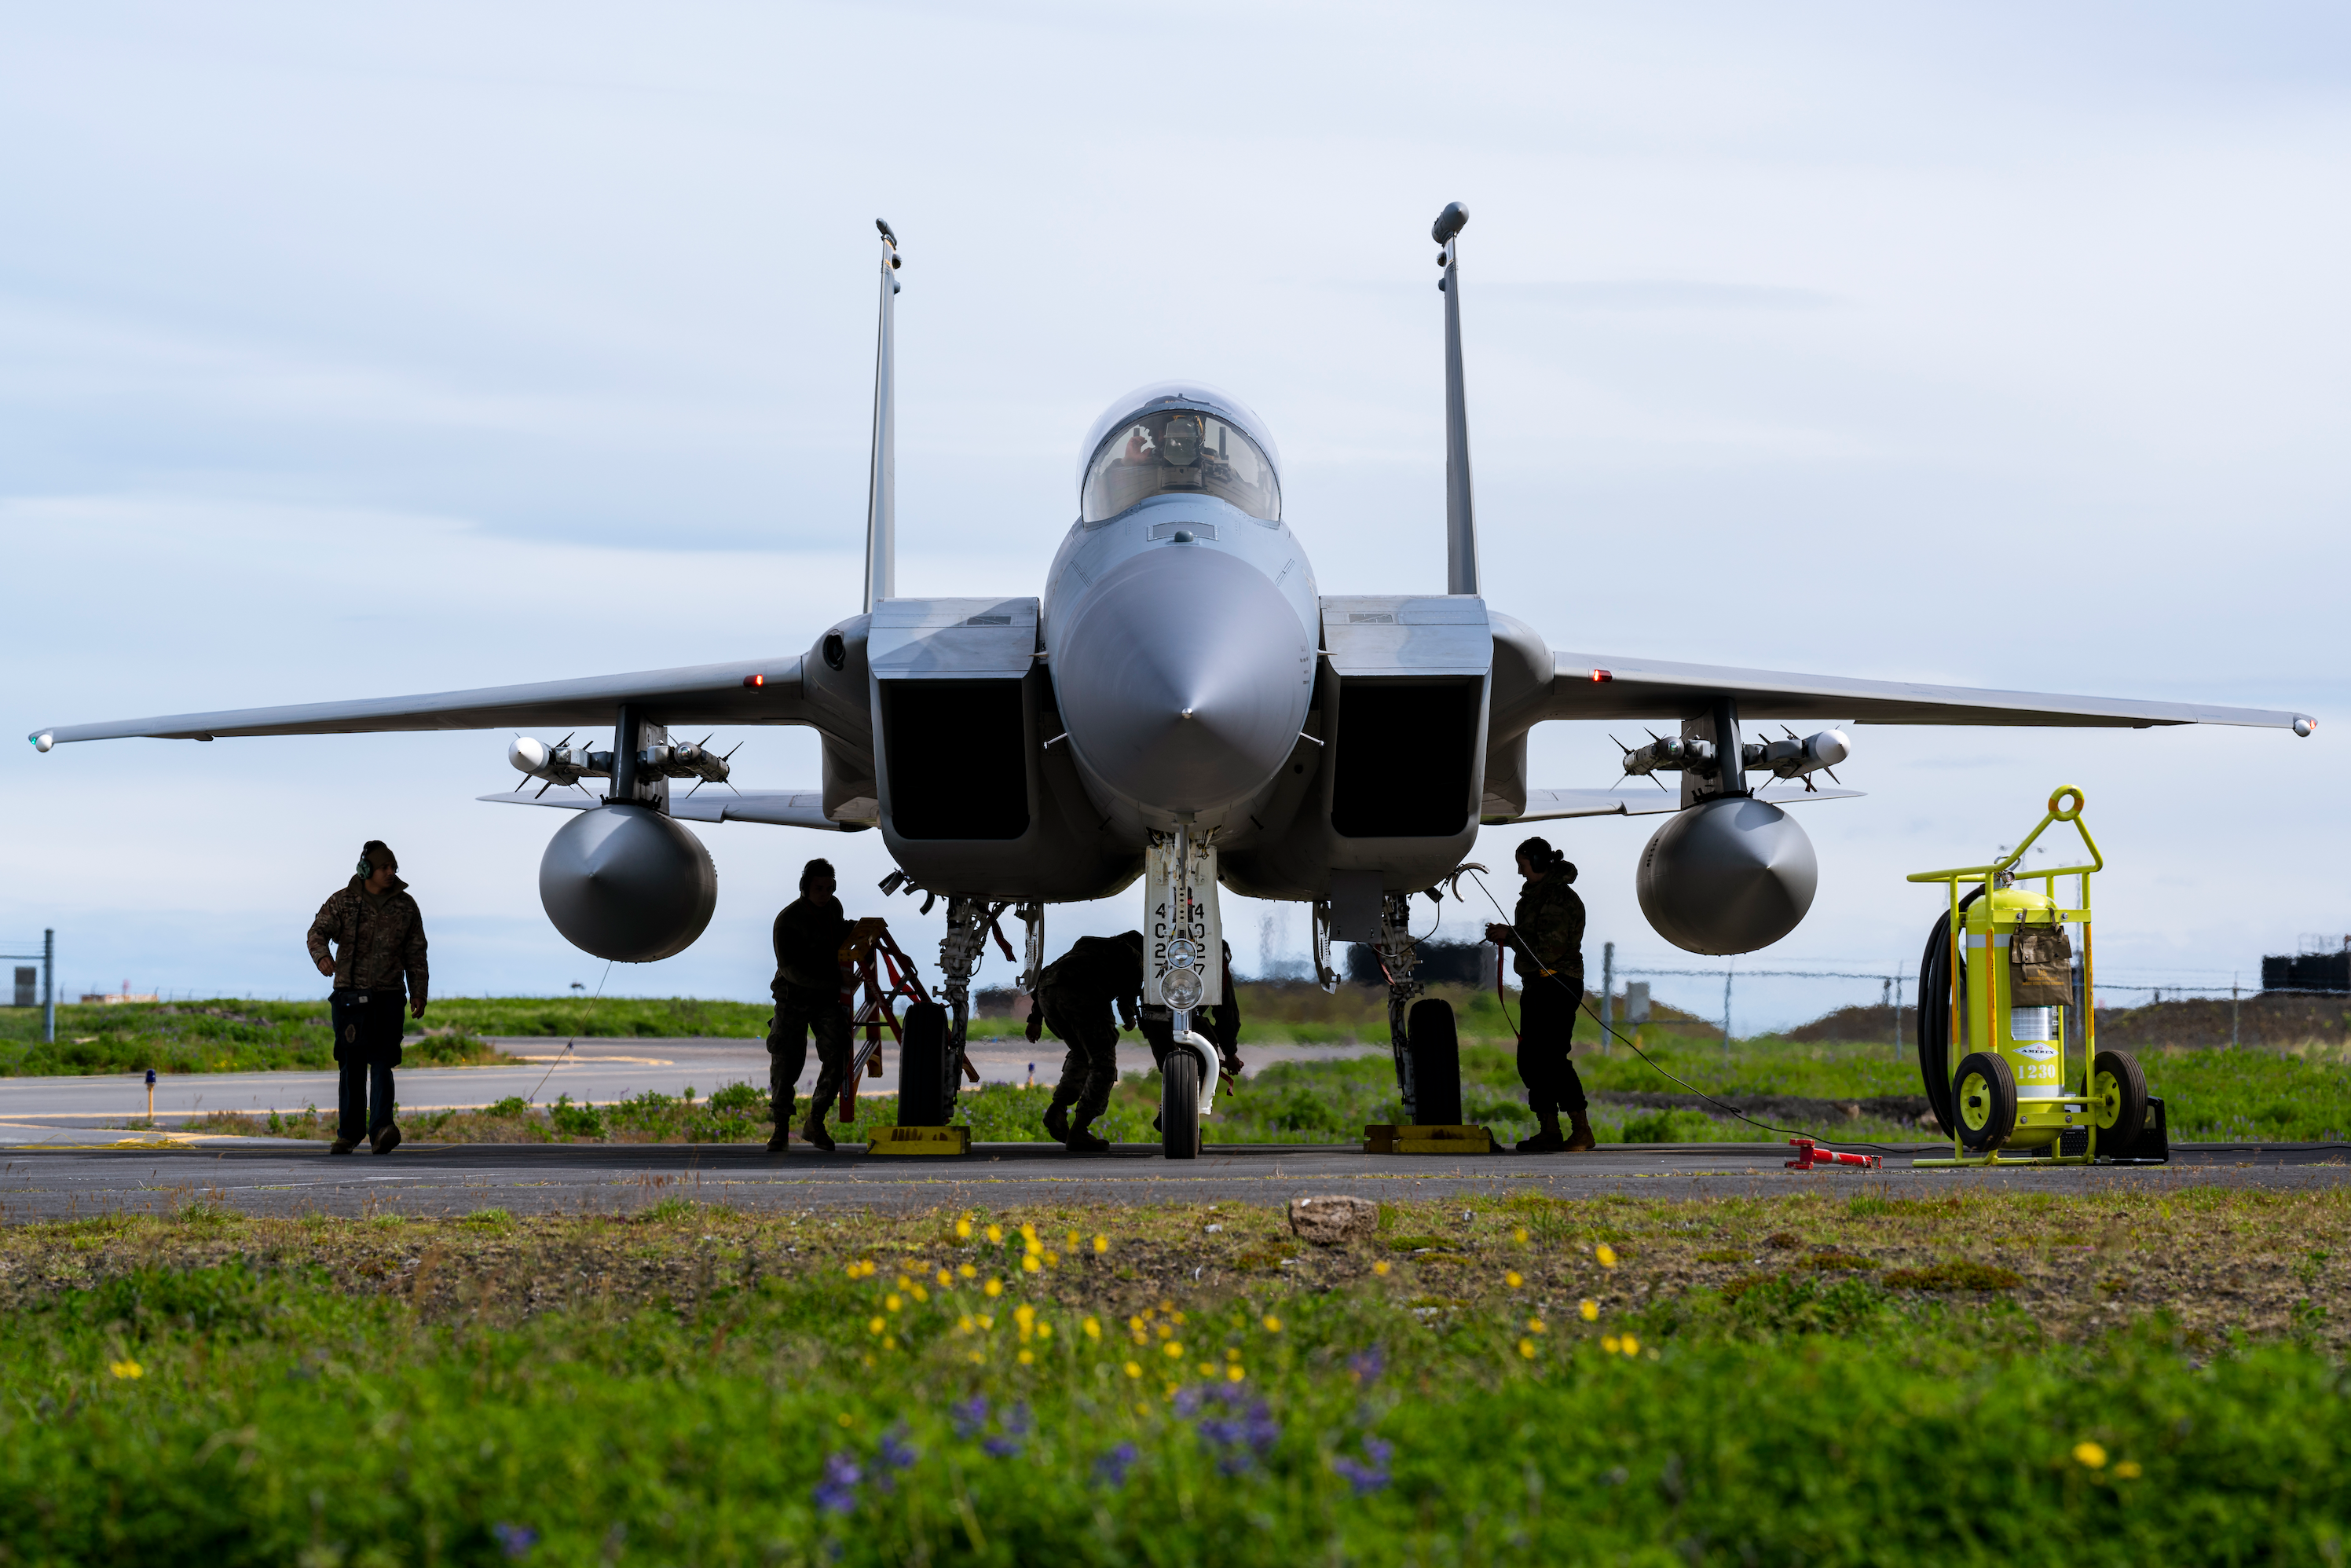 U.S. Air Force maintenance personnel assigned to the 48th Fighter Wing attend to an F-15C Eagle during NATO Air Policing Operations at Keflavik Air Base, Iceland, July 27, 2021. This year marks 60 years of NATO Air Policing across Europe and remains a fundamental component of how NATO provides security to its members. (U.S. Air Force photo by Staff Sgt. Rachel Maxwell